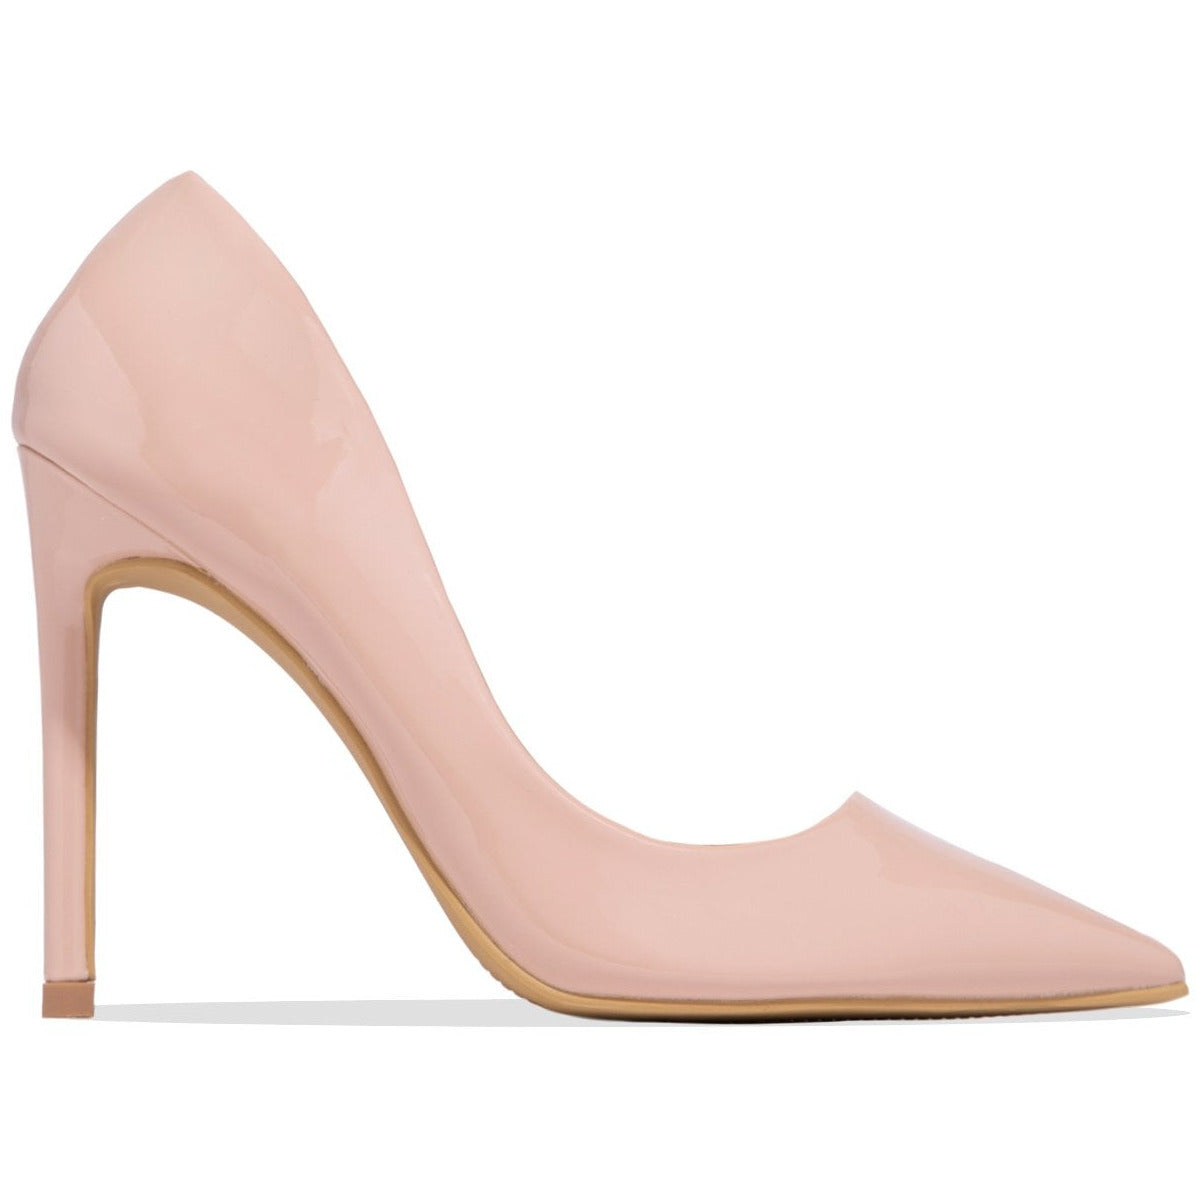 Catching Feelings Patent Pump - Nude